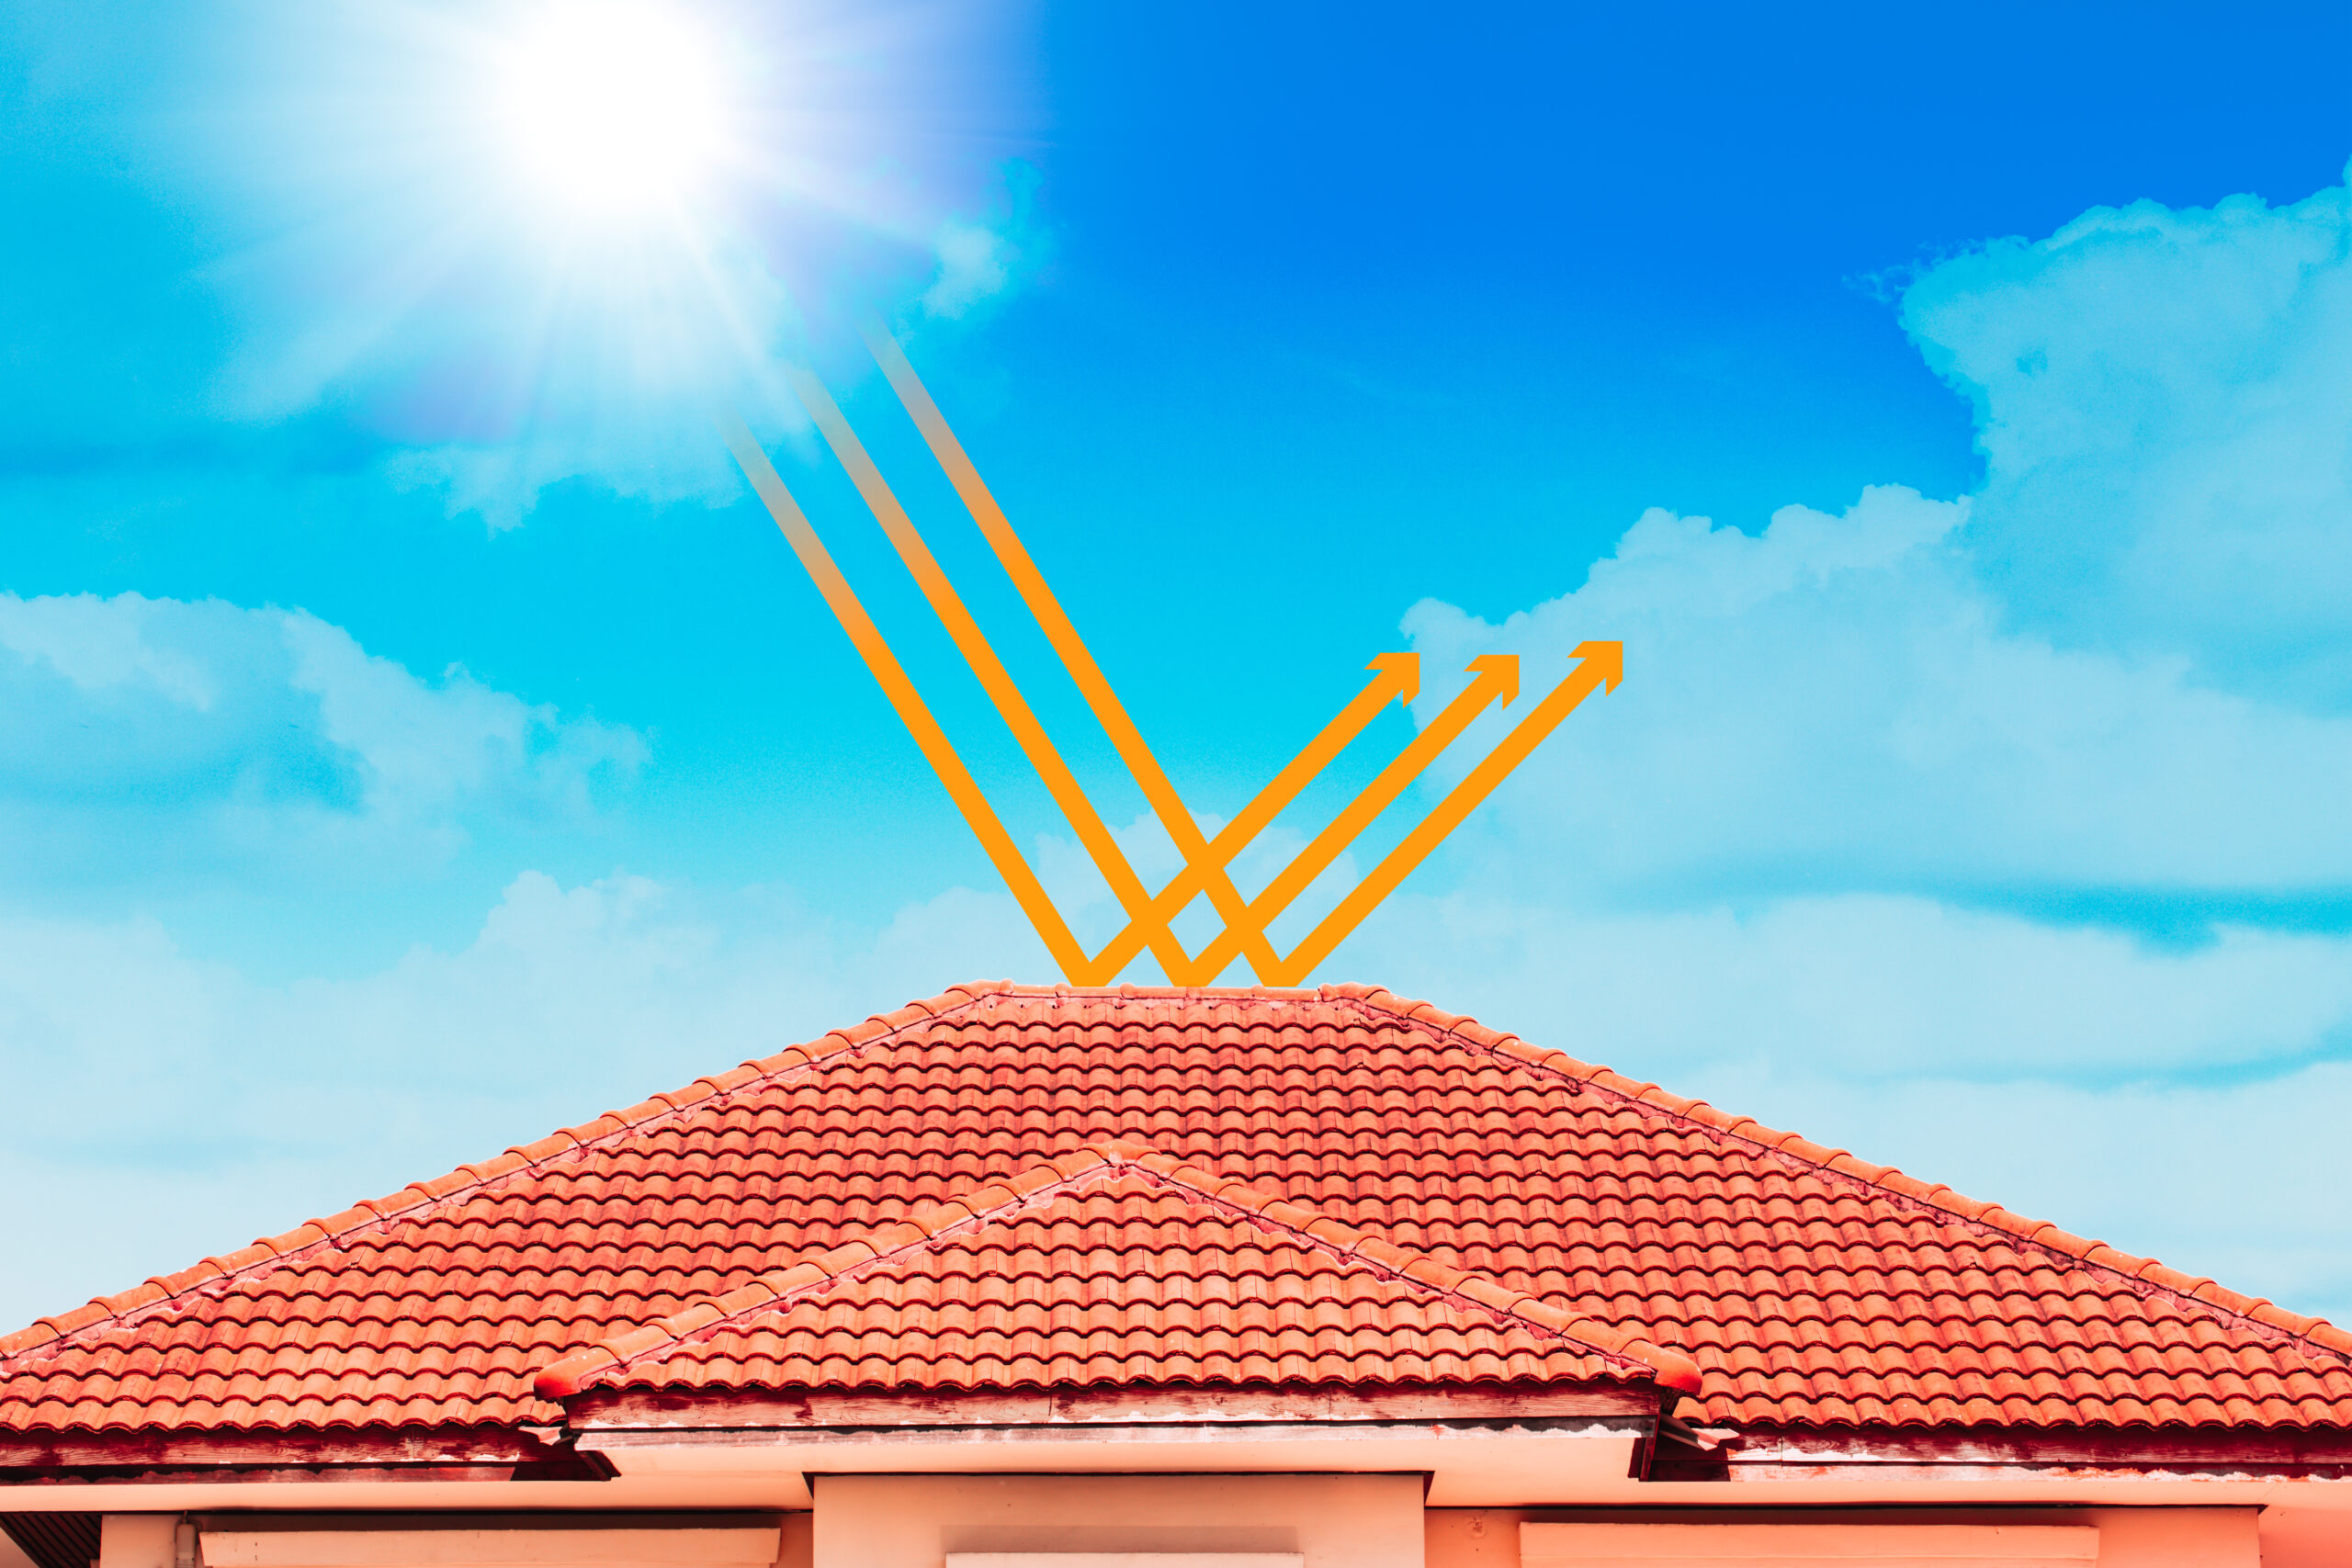 An image of sunlight being reflected off a roof of clay tiles. Three yellow arrows show the sunlight streaming down before being deflected back up.